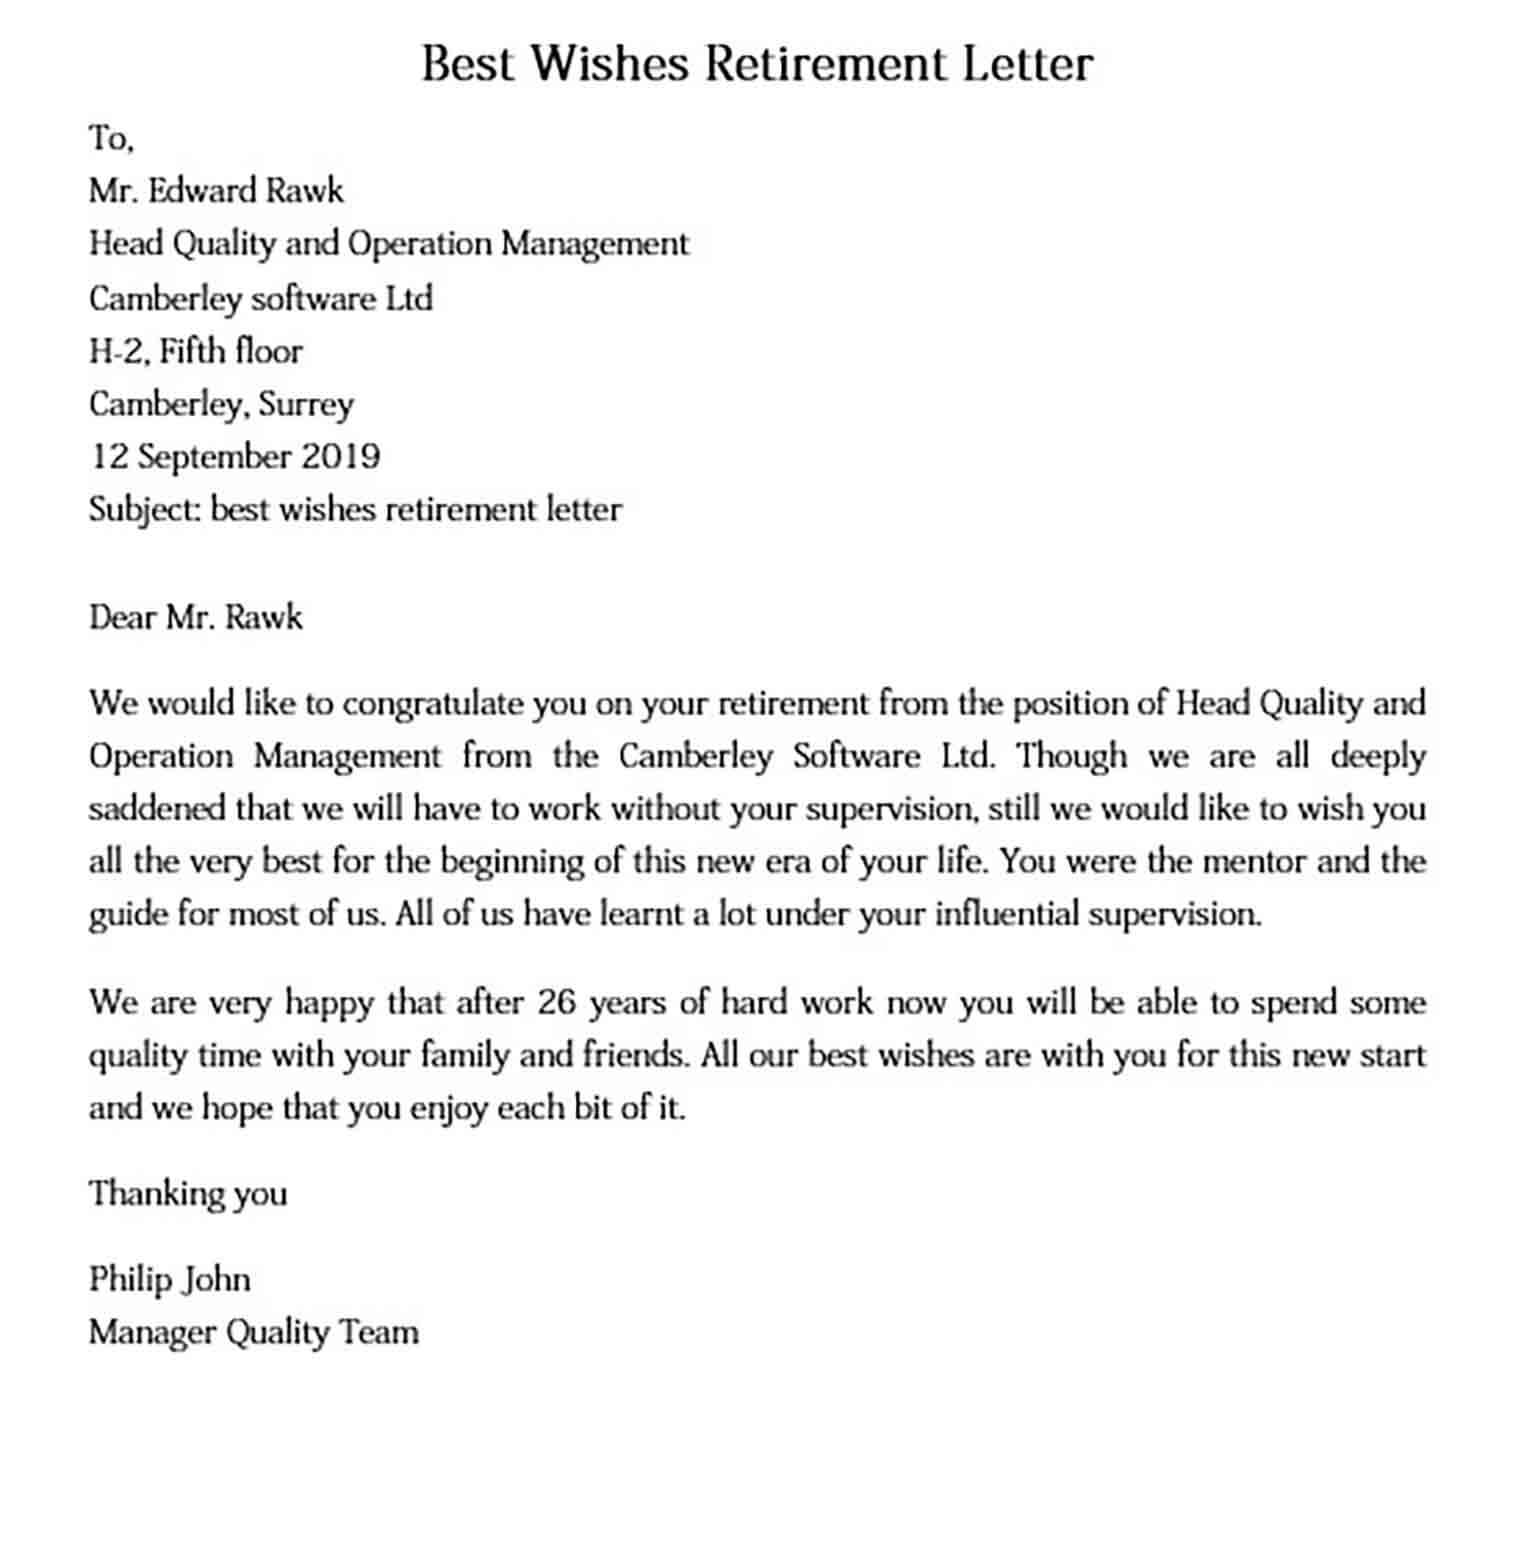 Sample Letter Of Retirement To Employer from moussyusa.com